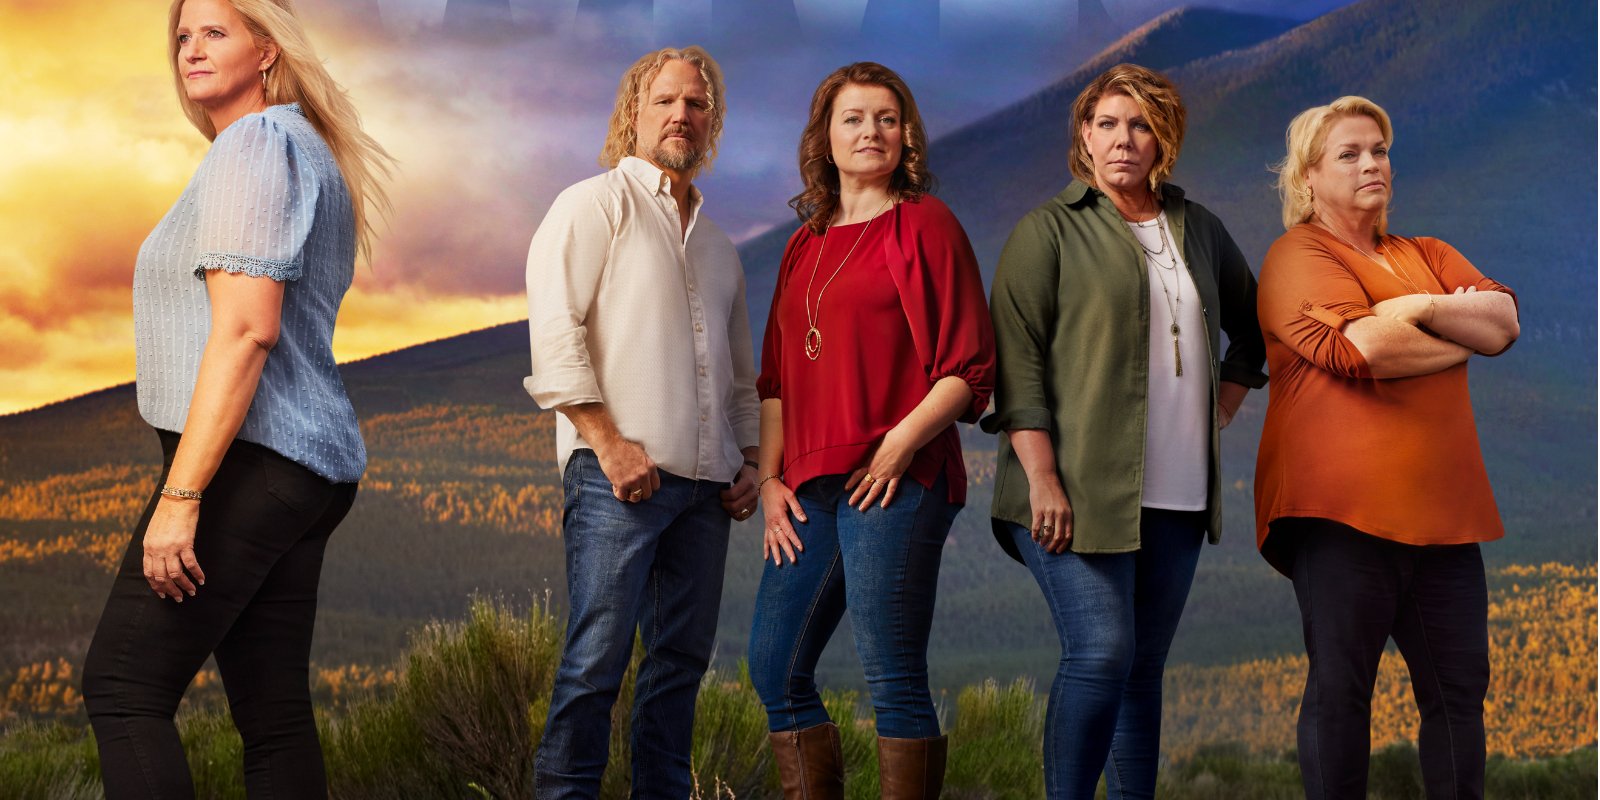 Christine, Kody, Robyn, Meri, and Janelle Brown of TLC's 'Sister Wives'